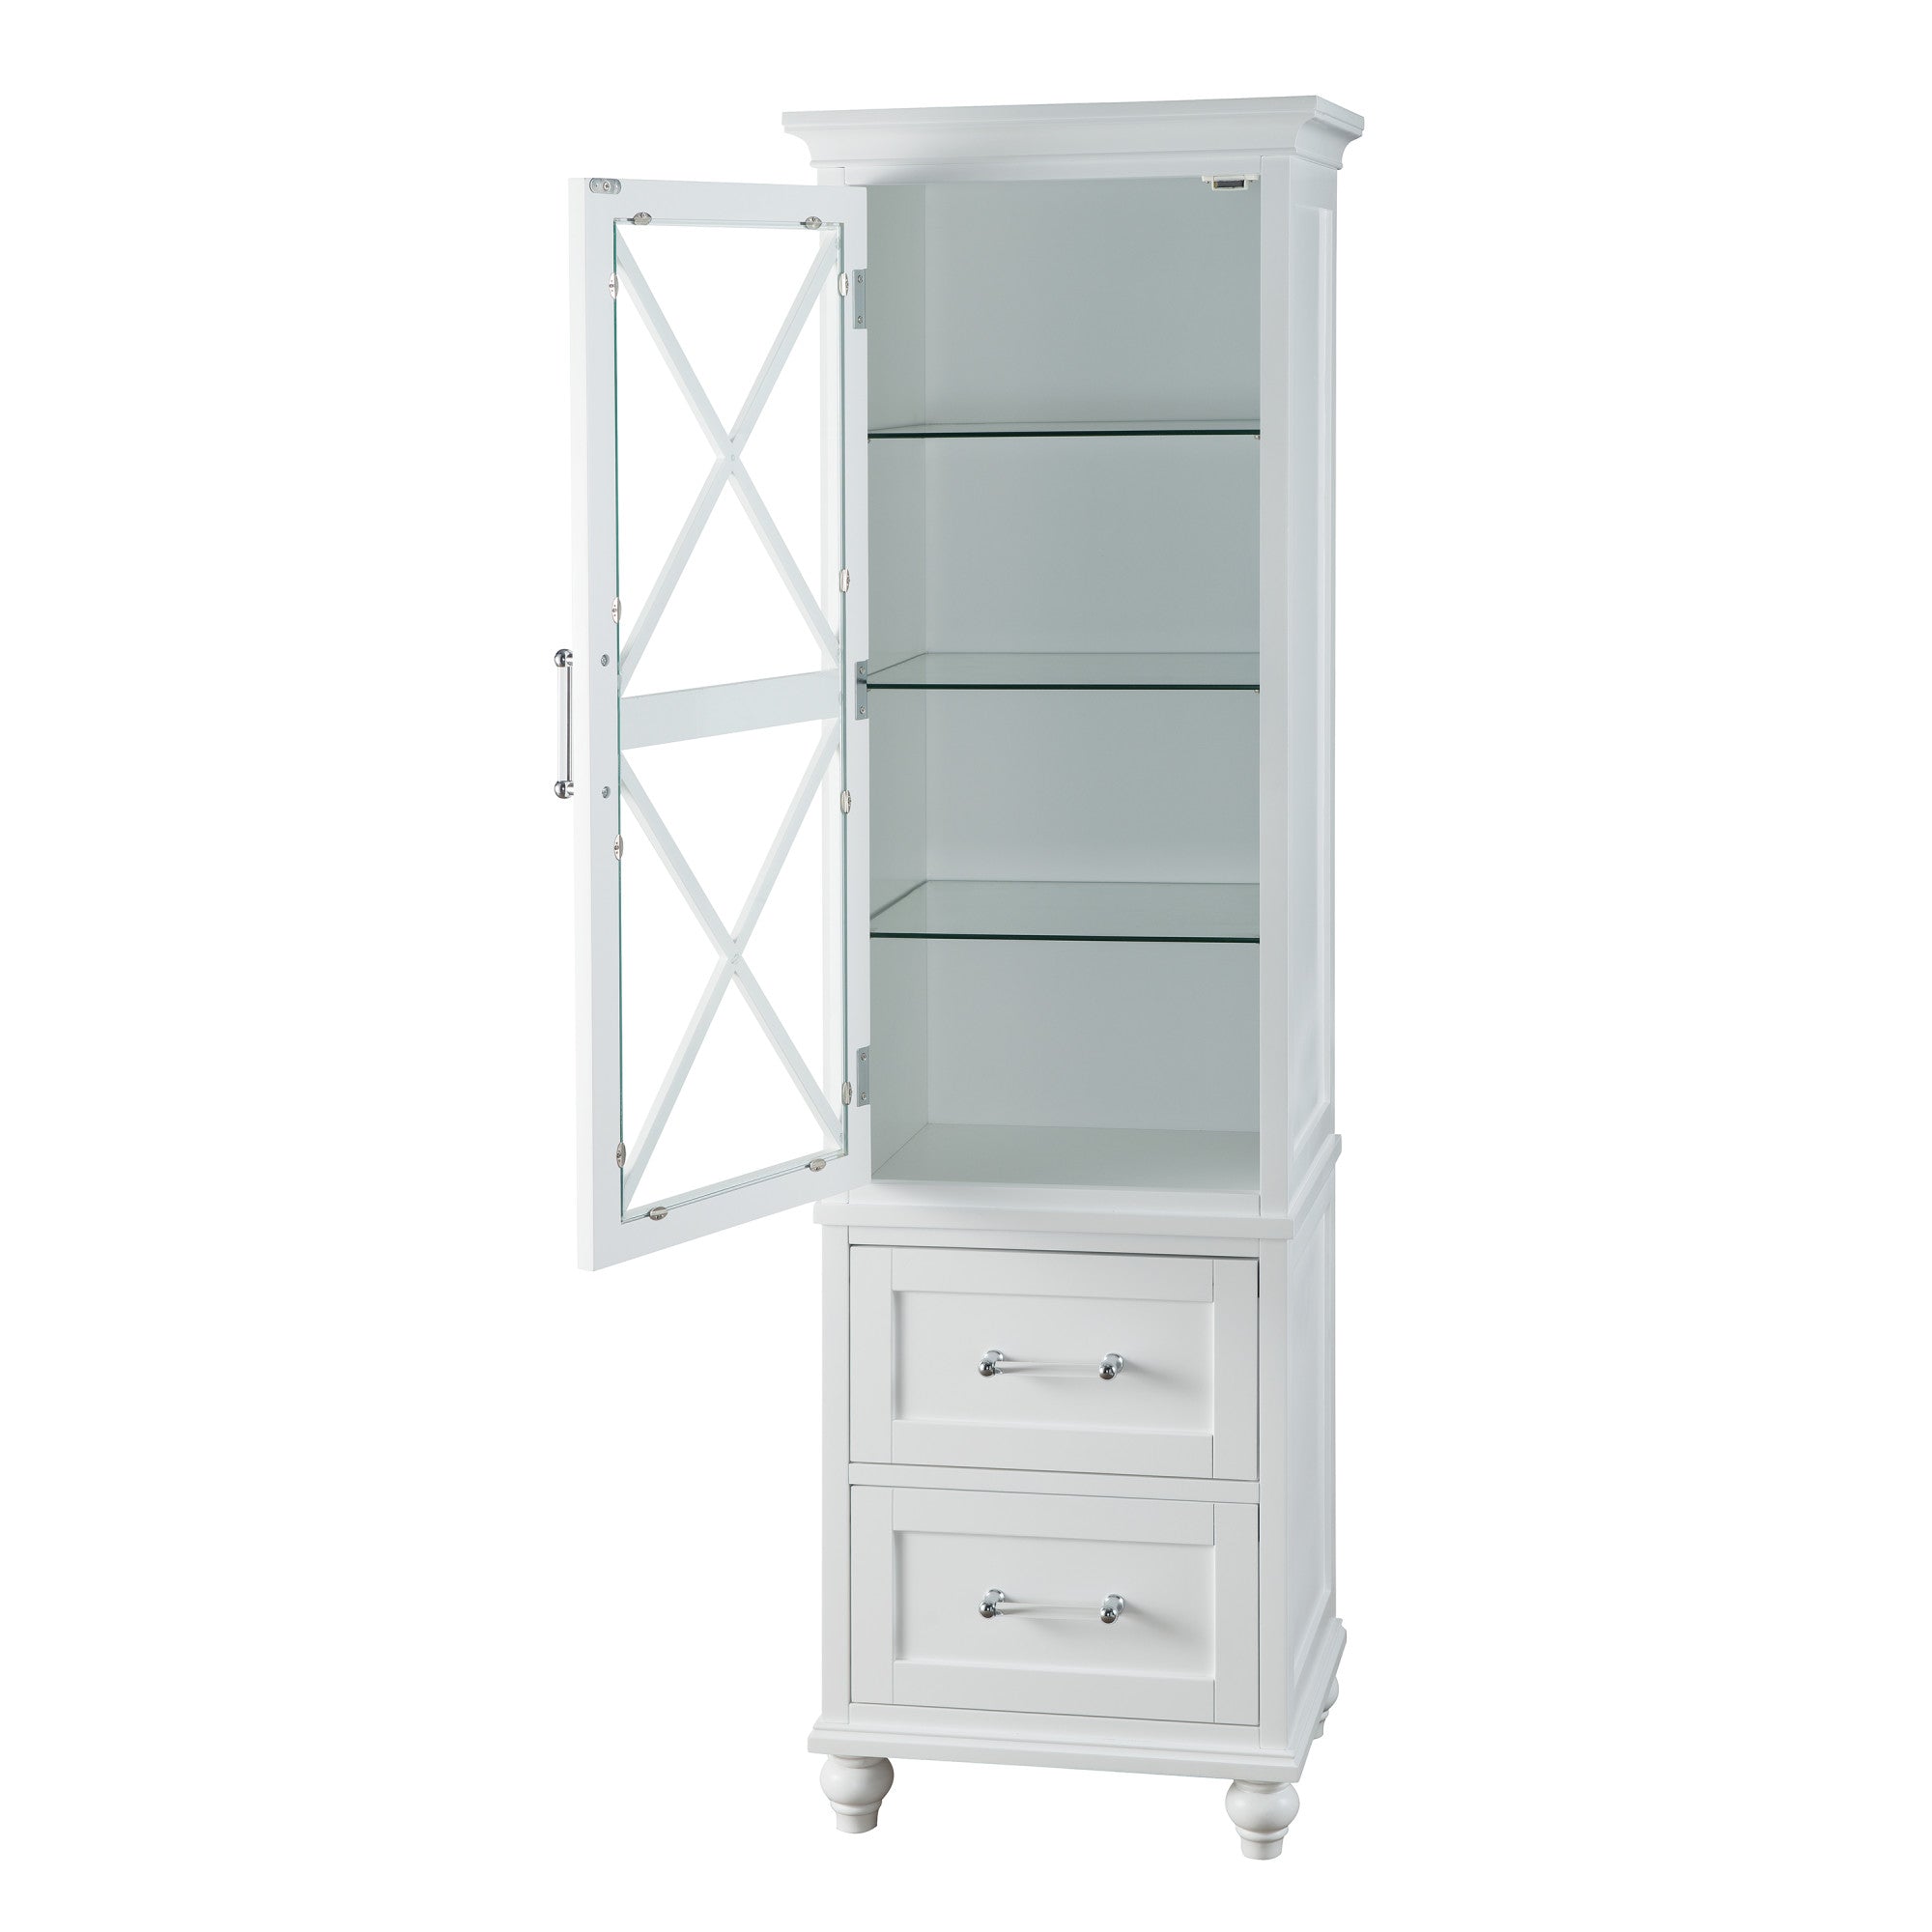 Teamson Home Blue Ridge Wooden Linen Tower Cabinet with Adjustable Shelves, White